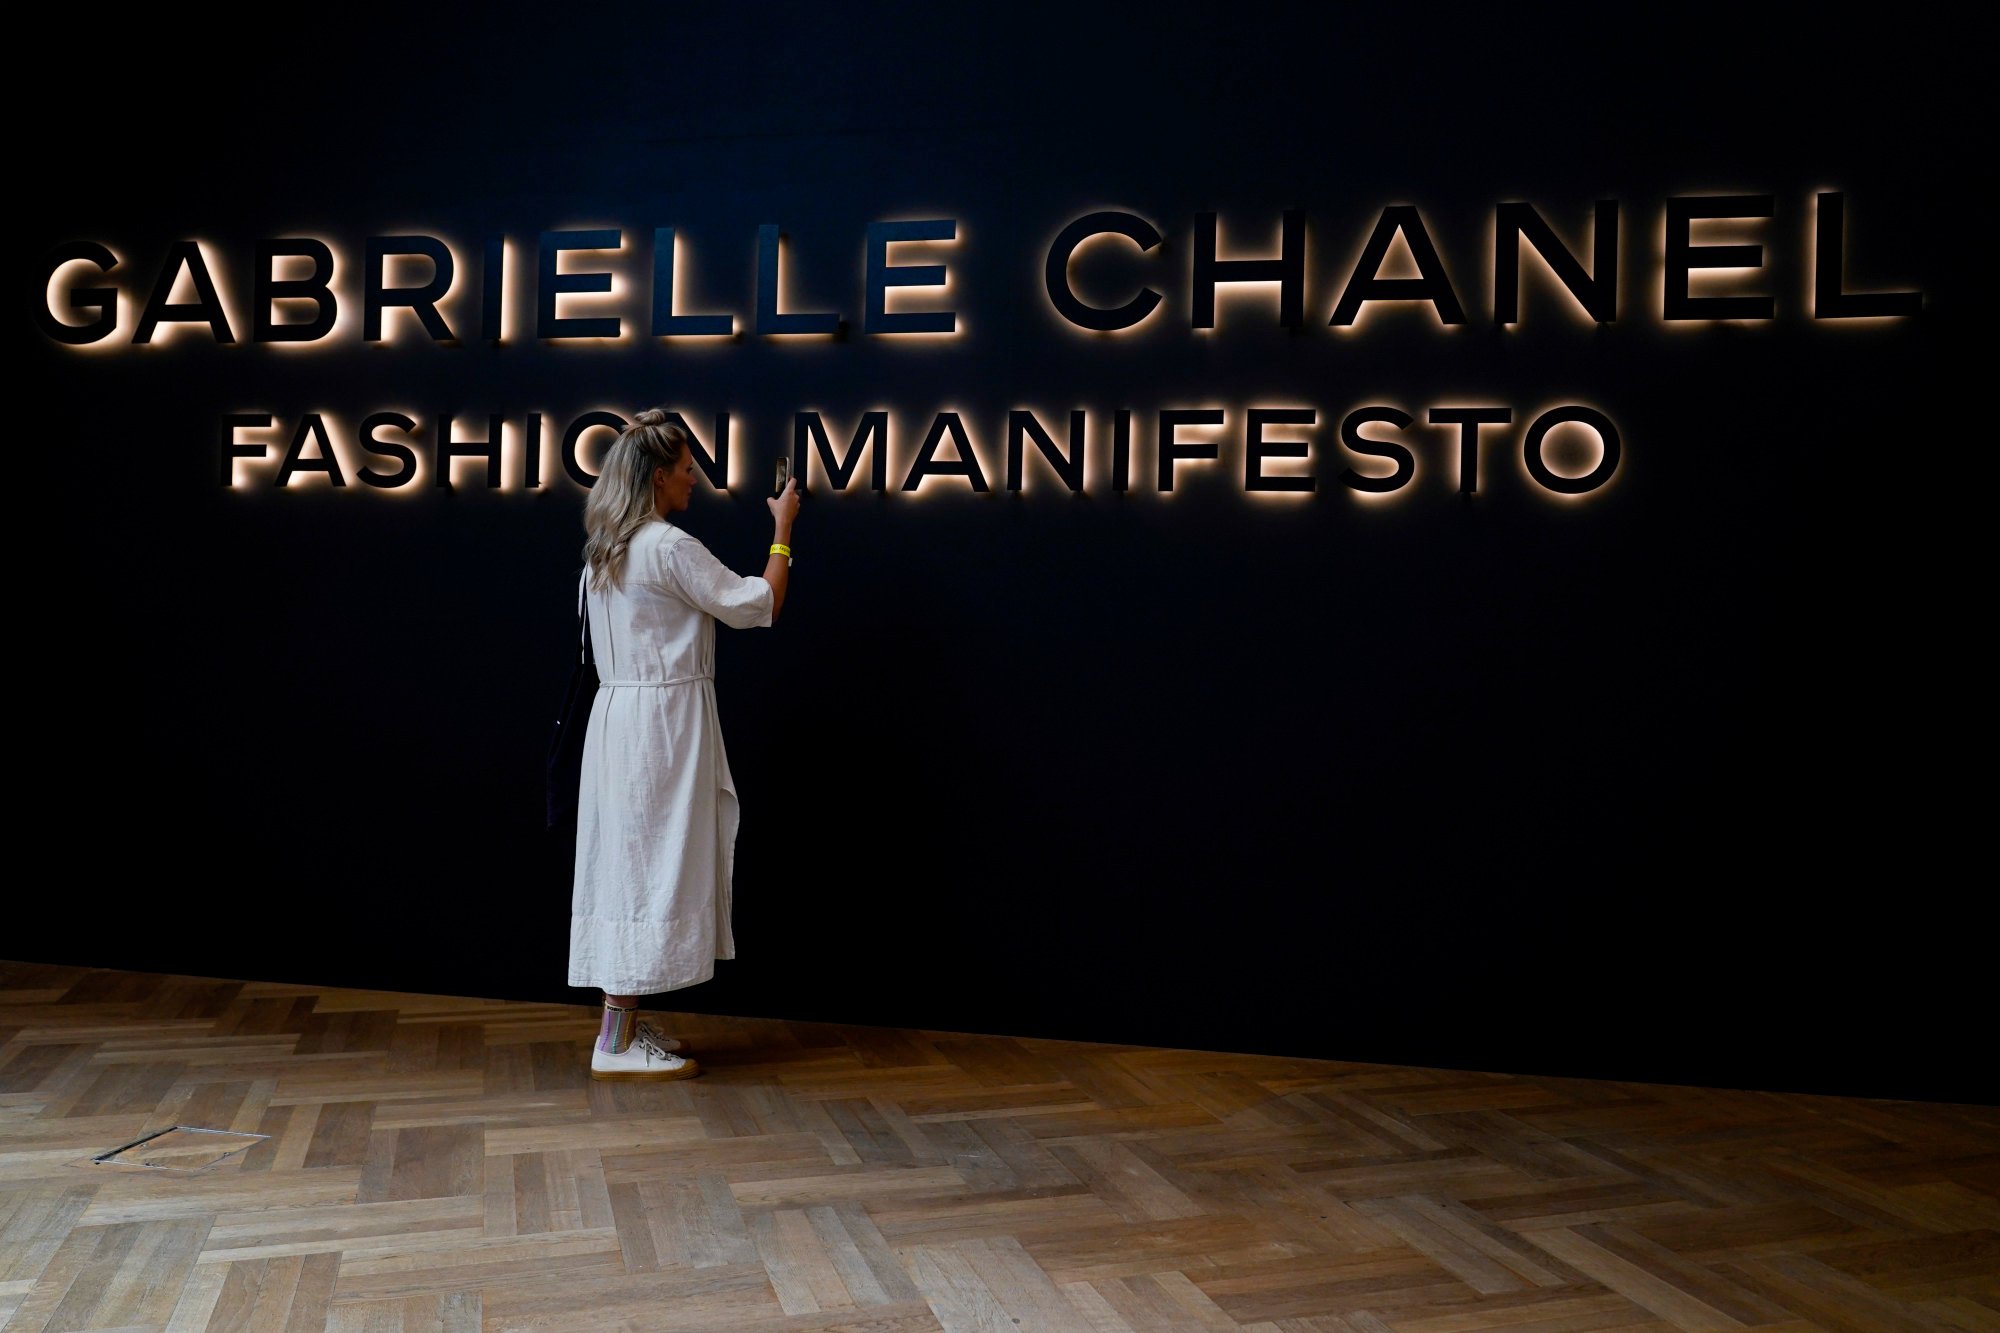 Coco' Chanel's influential fashion on show at London exhibit